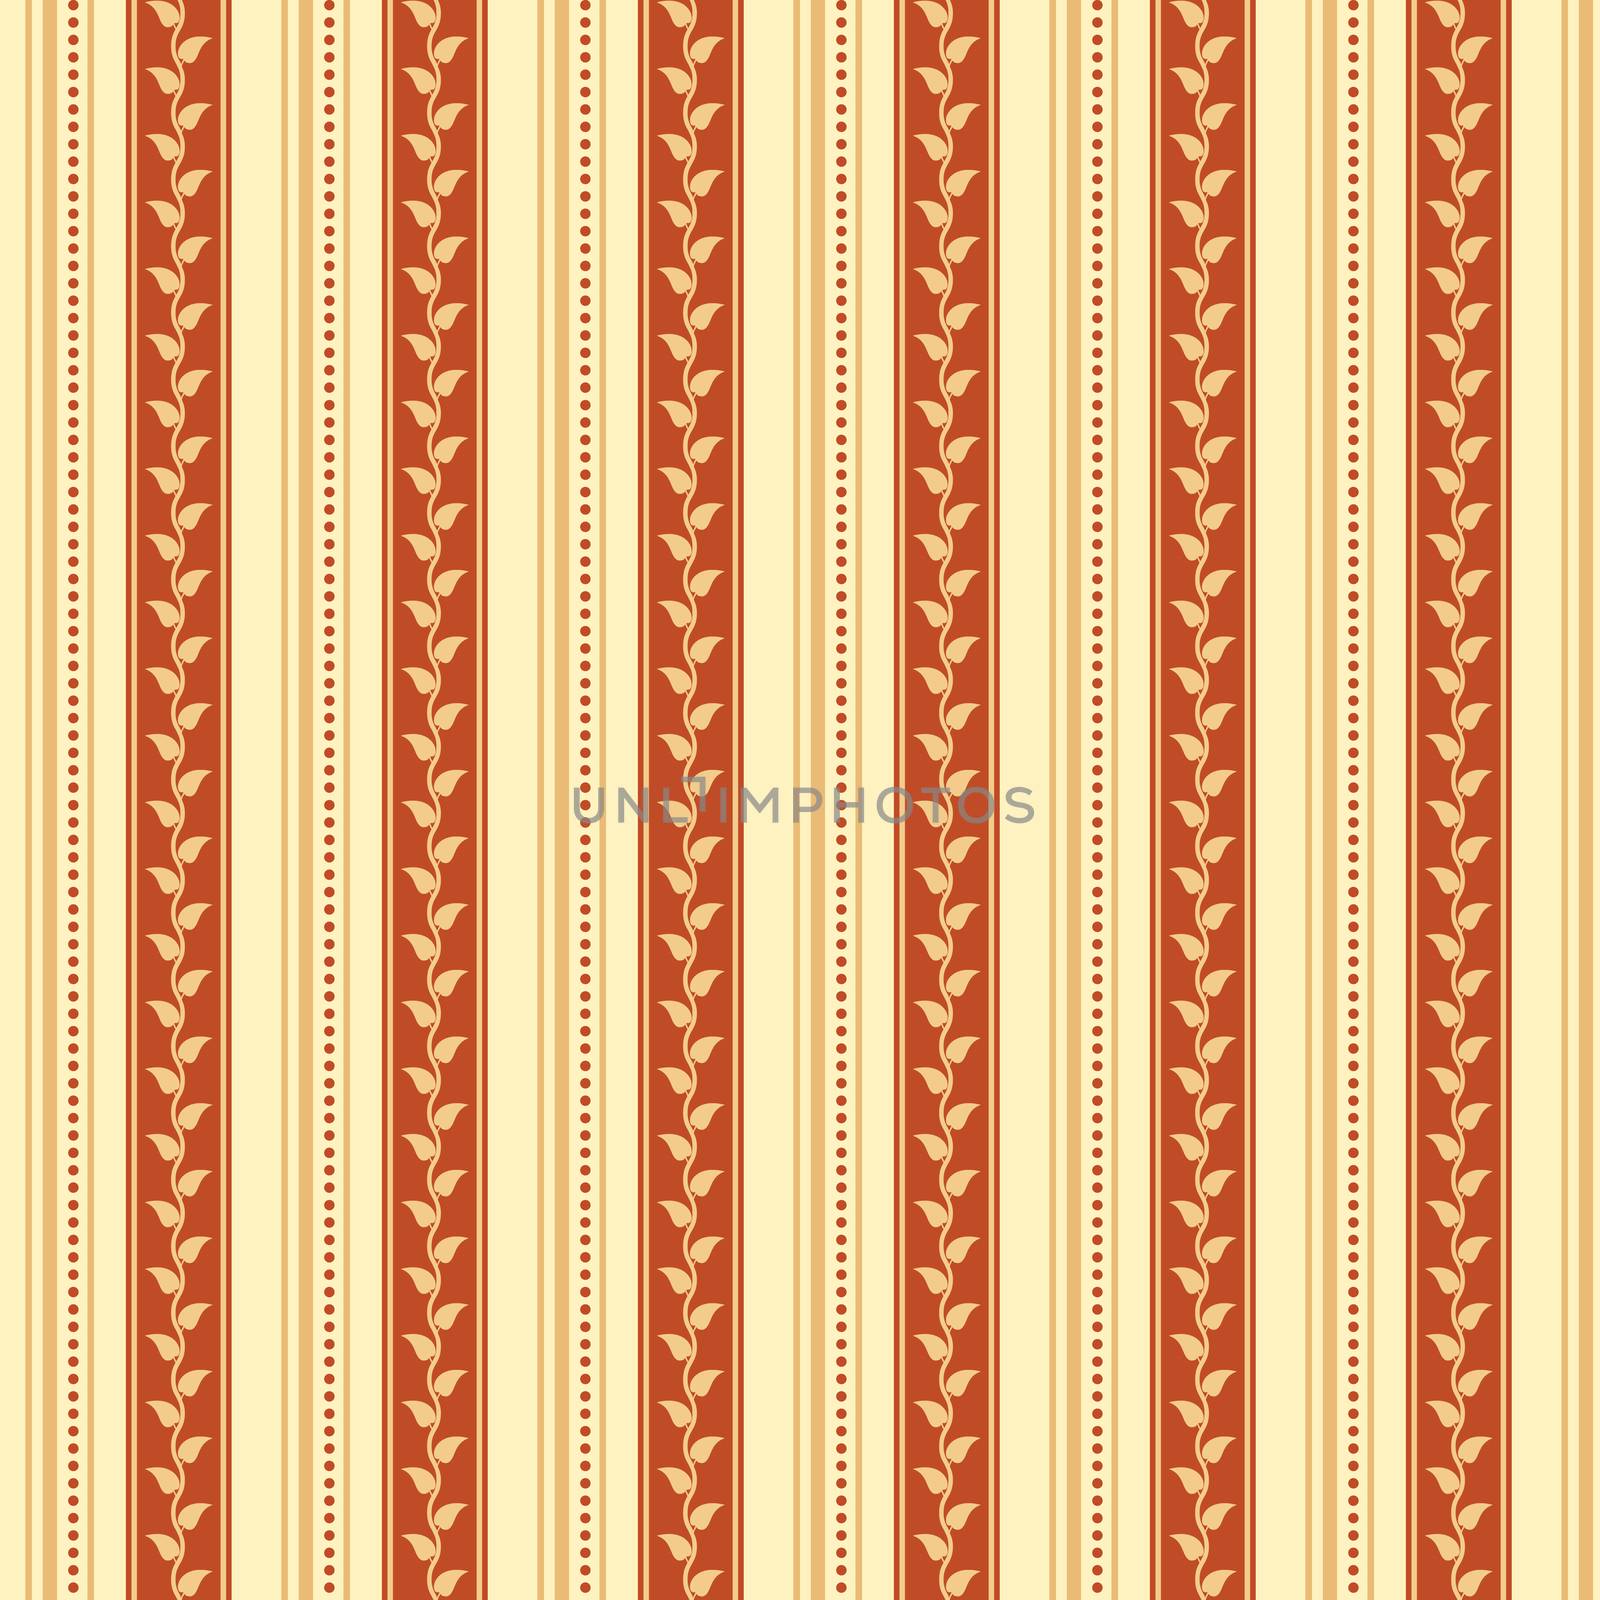 Retro background made with vertical stripes dots and leaves, Vintage hipster seamless pattern.